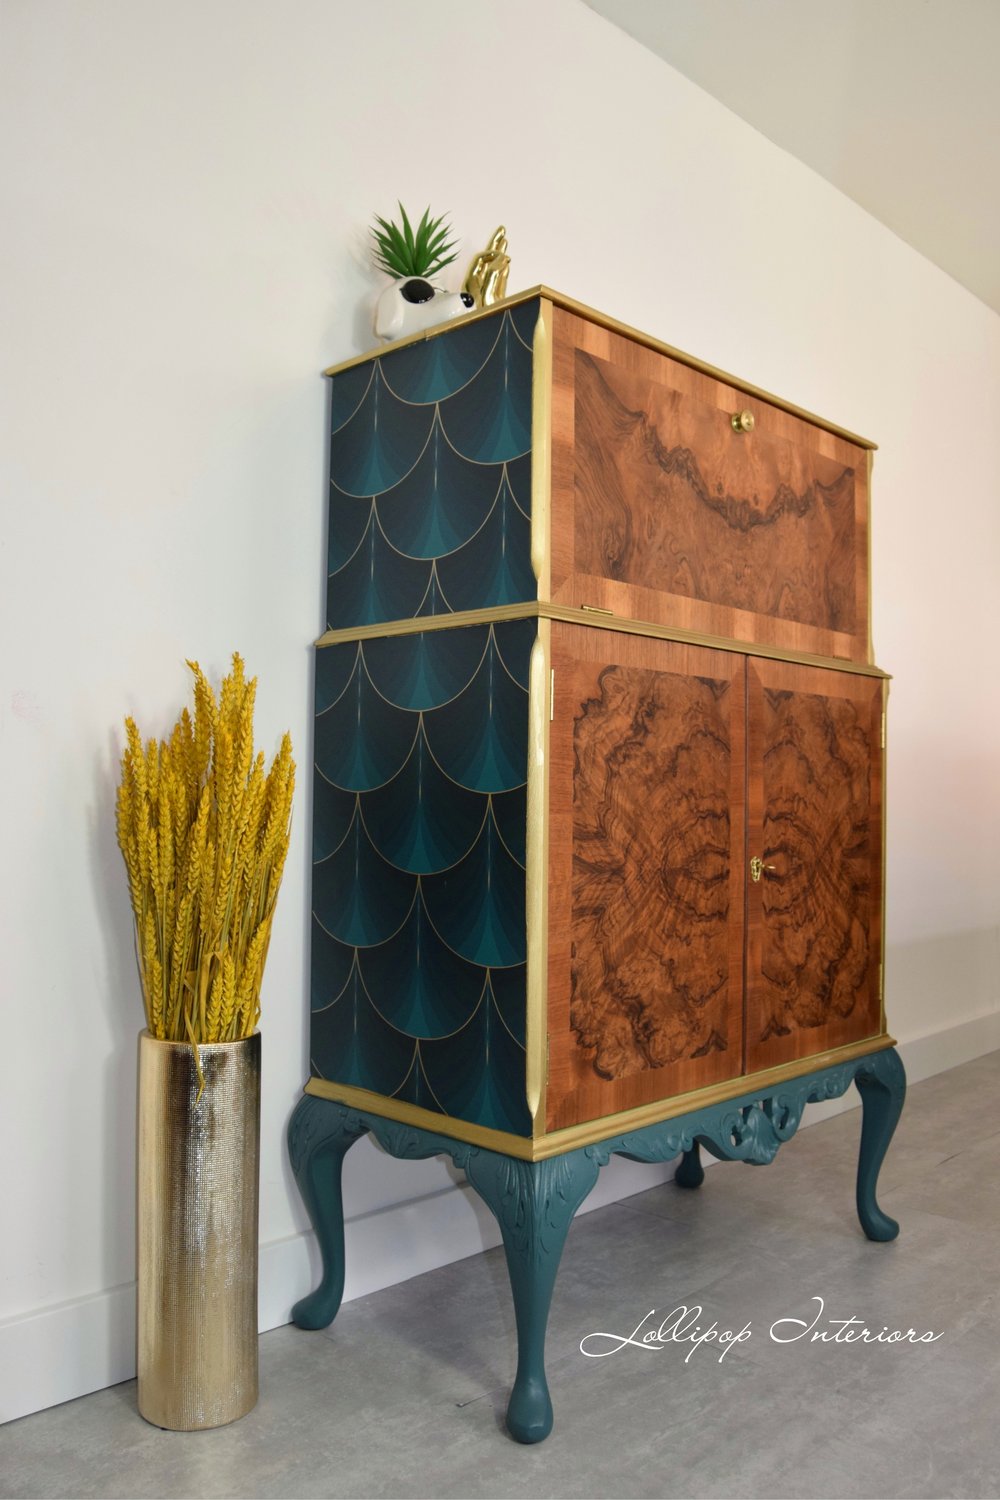 Image of Art deco cocktail cabinet in green and gold